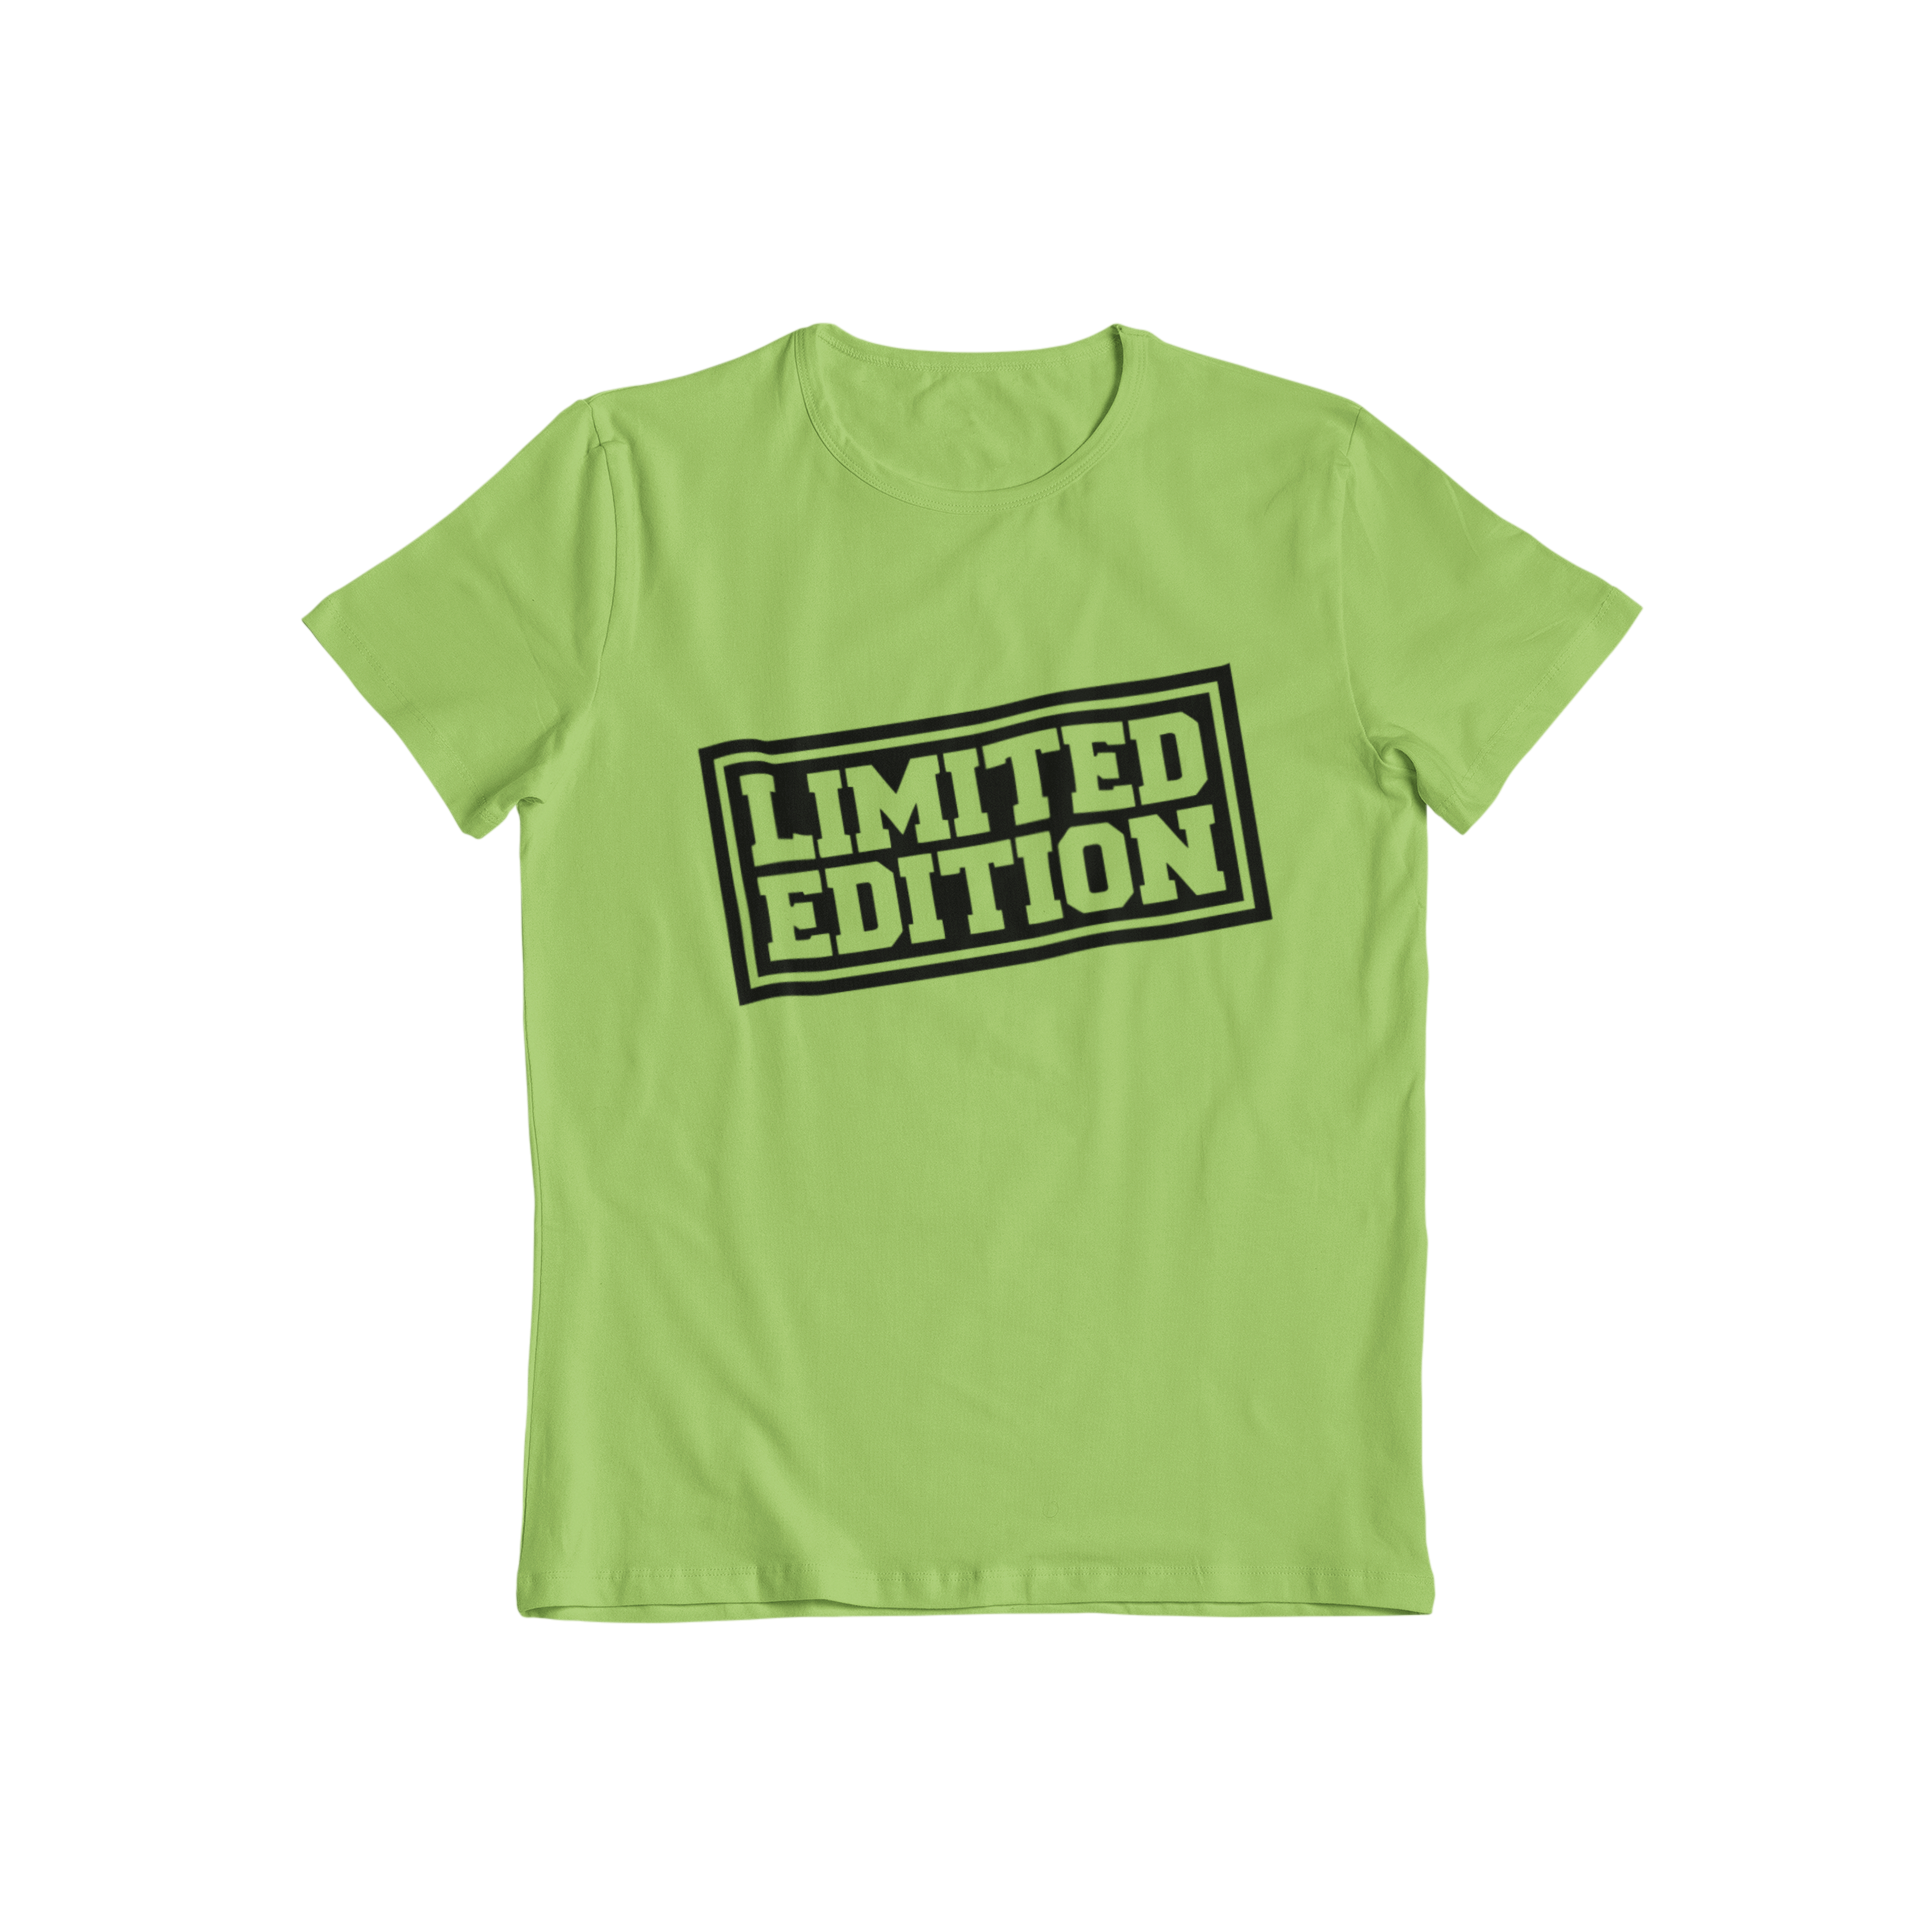 Teevolution is the ultimate limited edition t-shirt! Our slogan t-shirt is perfect for those who want to stand out from the crowd. With our unique design, you can proclaim that you are one of a kind. Get your limited edition t-shirt today and show the world what makes you unique!